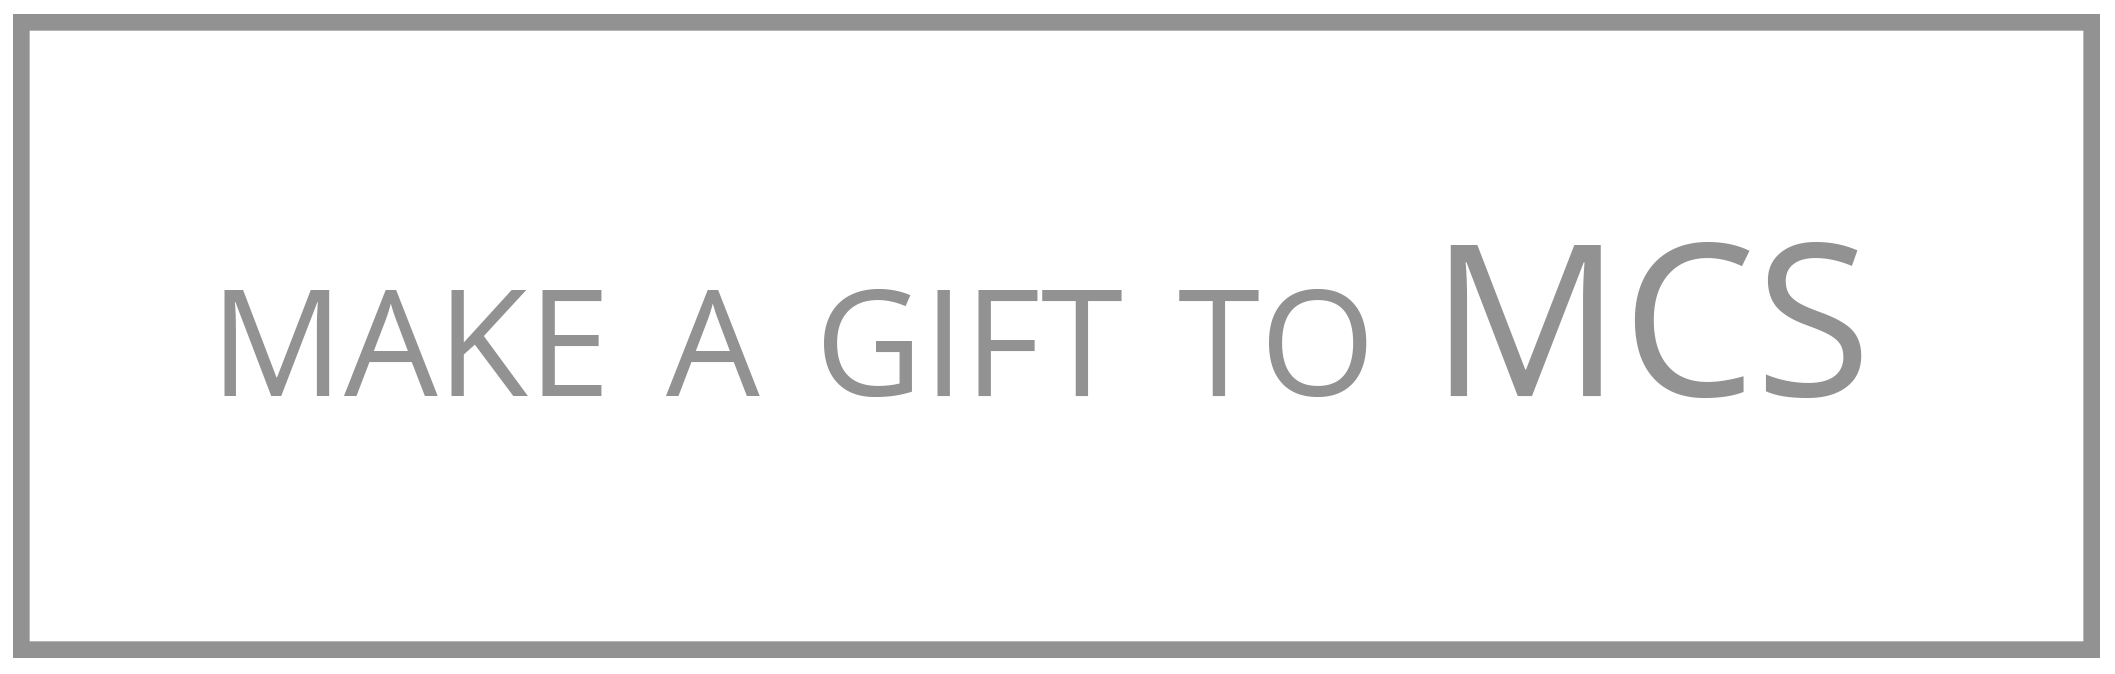 Give a Gift to MCS